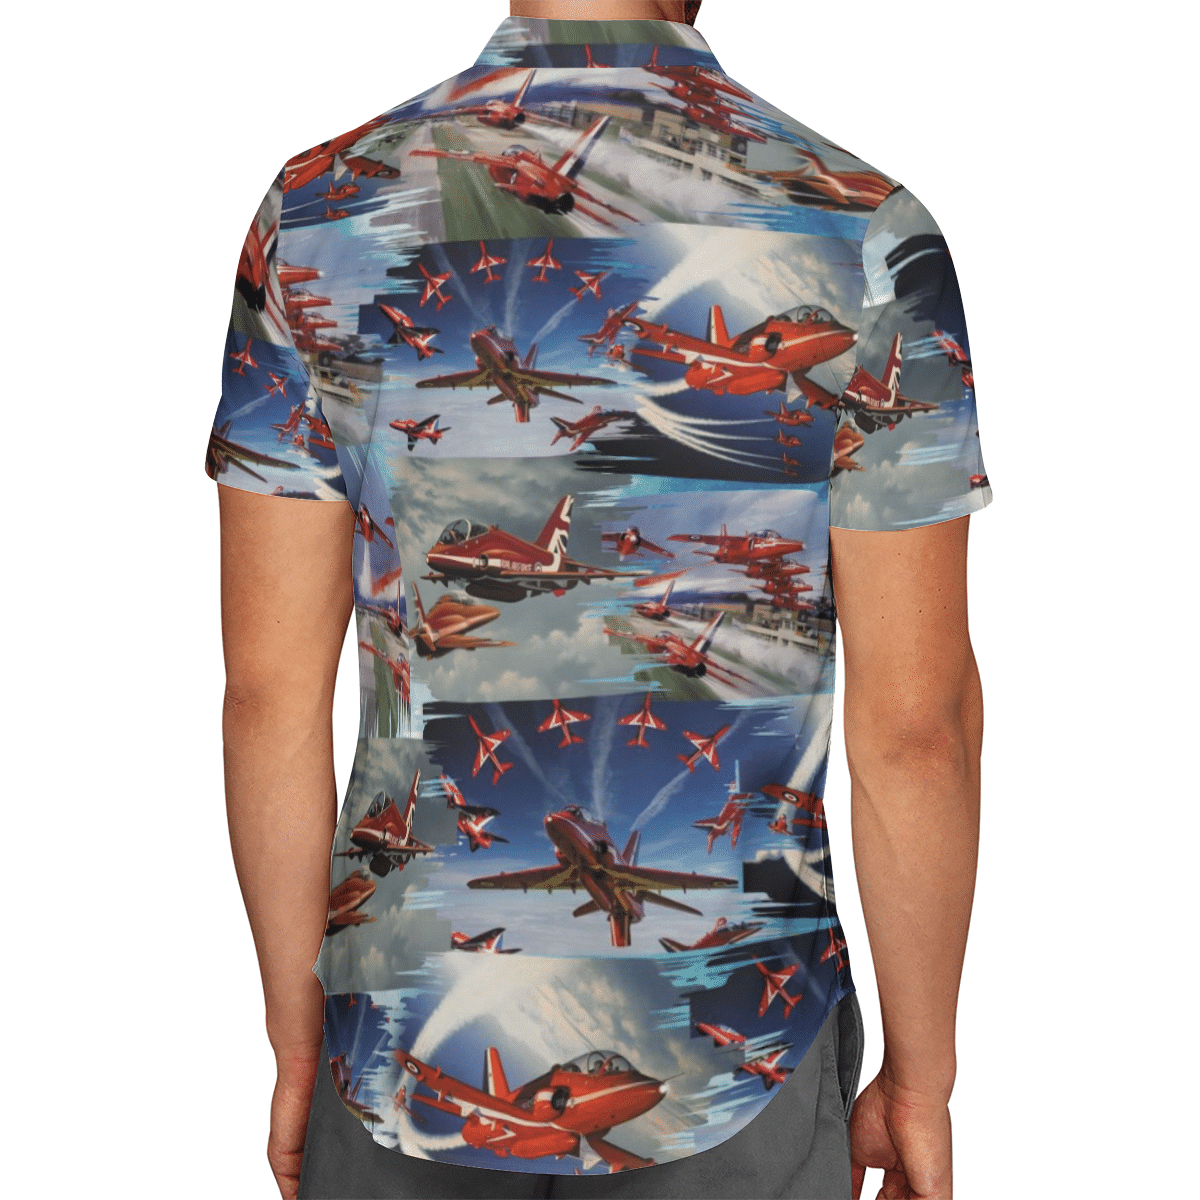 Going to the beach with a quality shirt 205